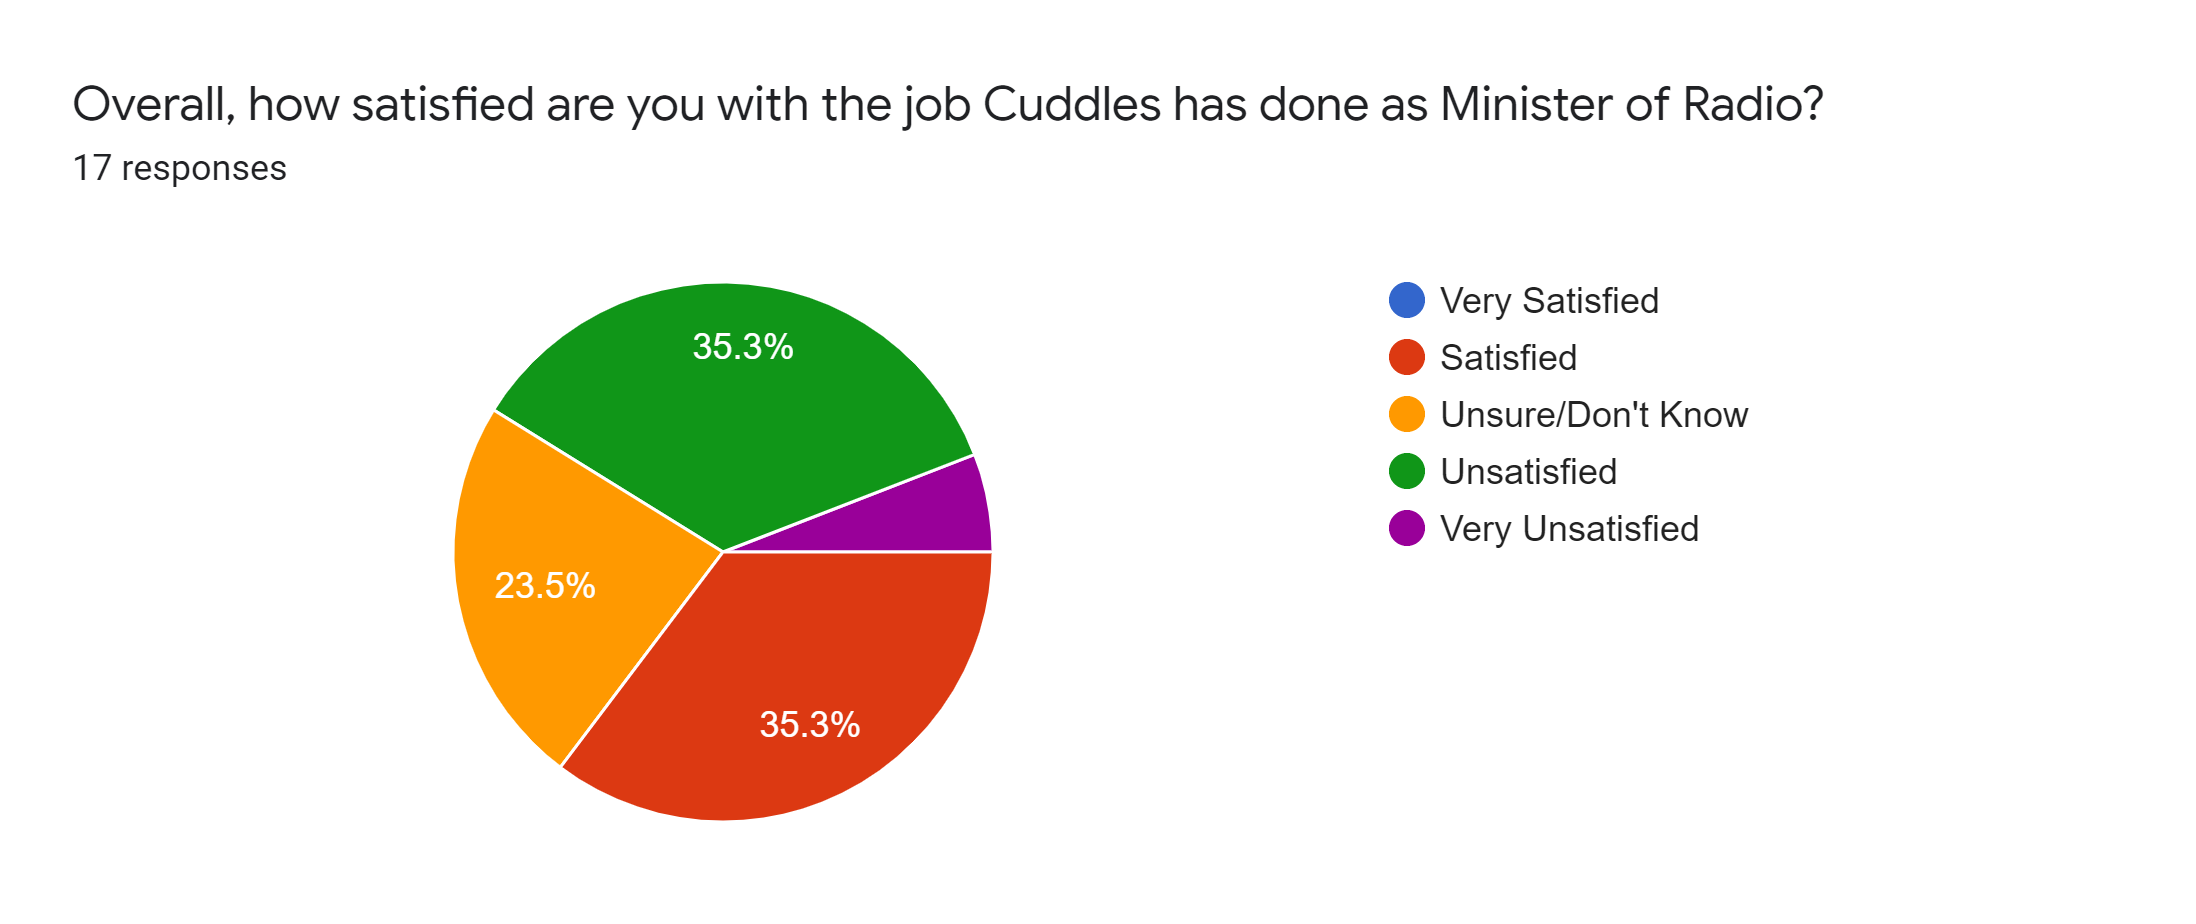 Forms response chart. Question title: Overall, how satisfied are you with the job Cuddles has done as Minister of Radio?. Number of responses: 17 responses.